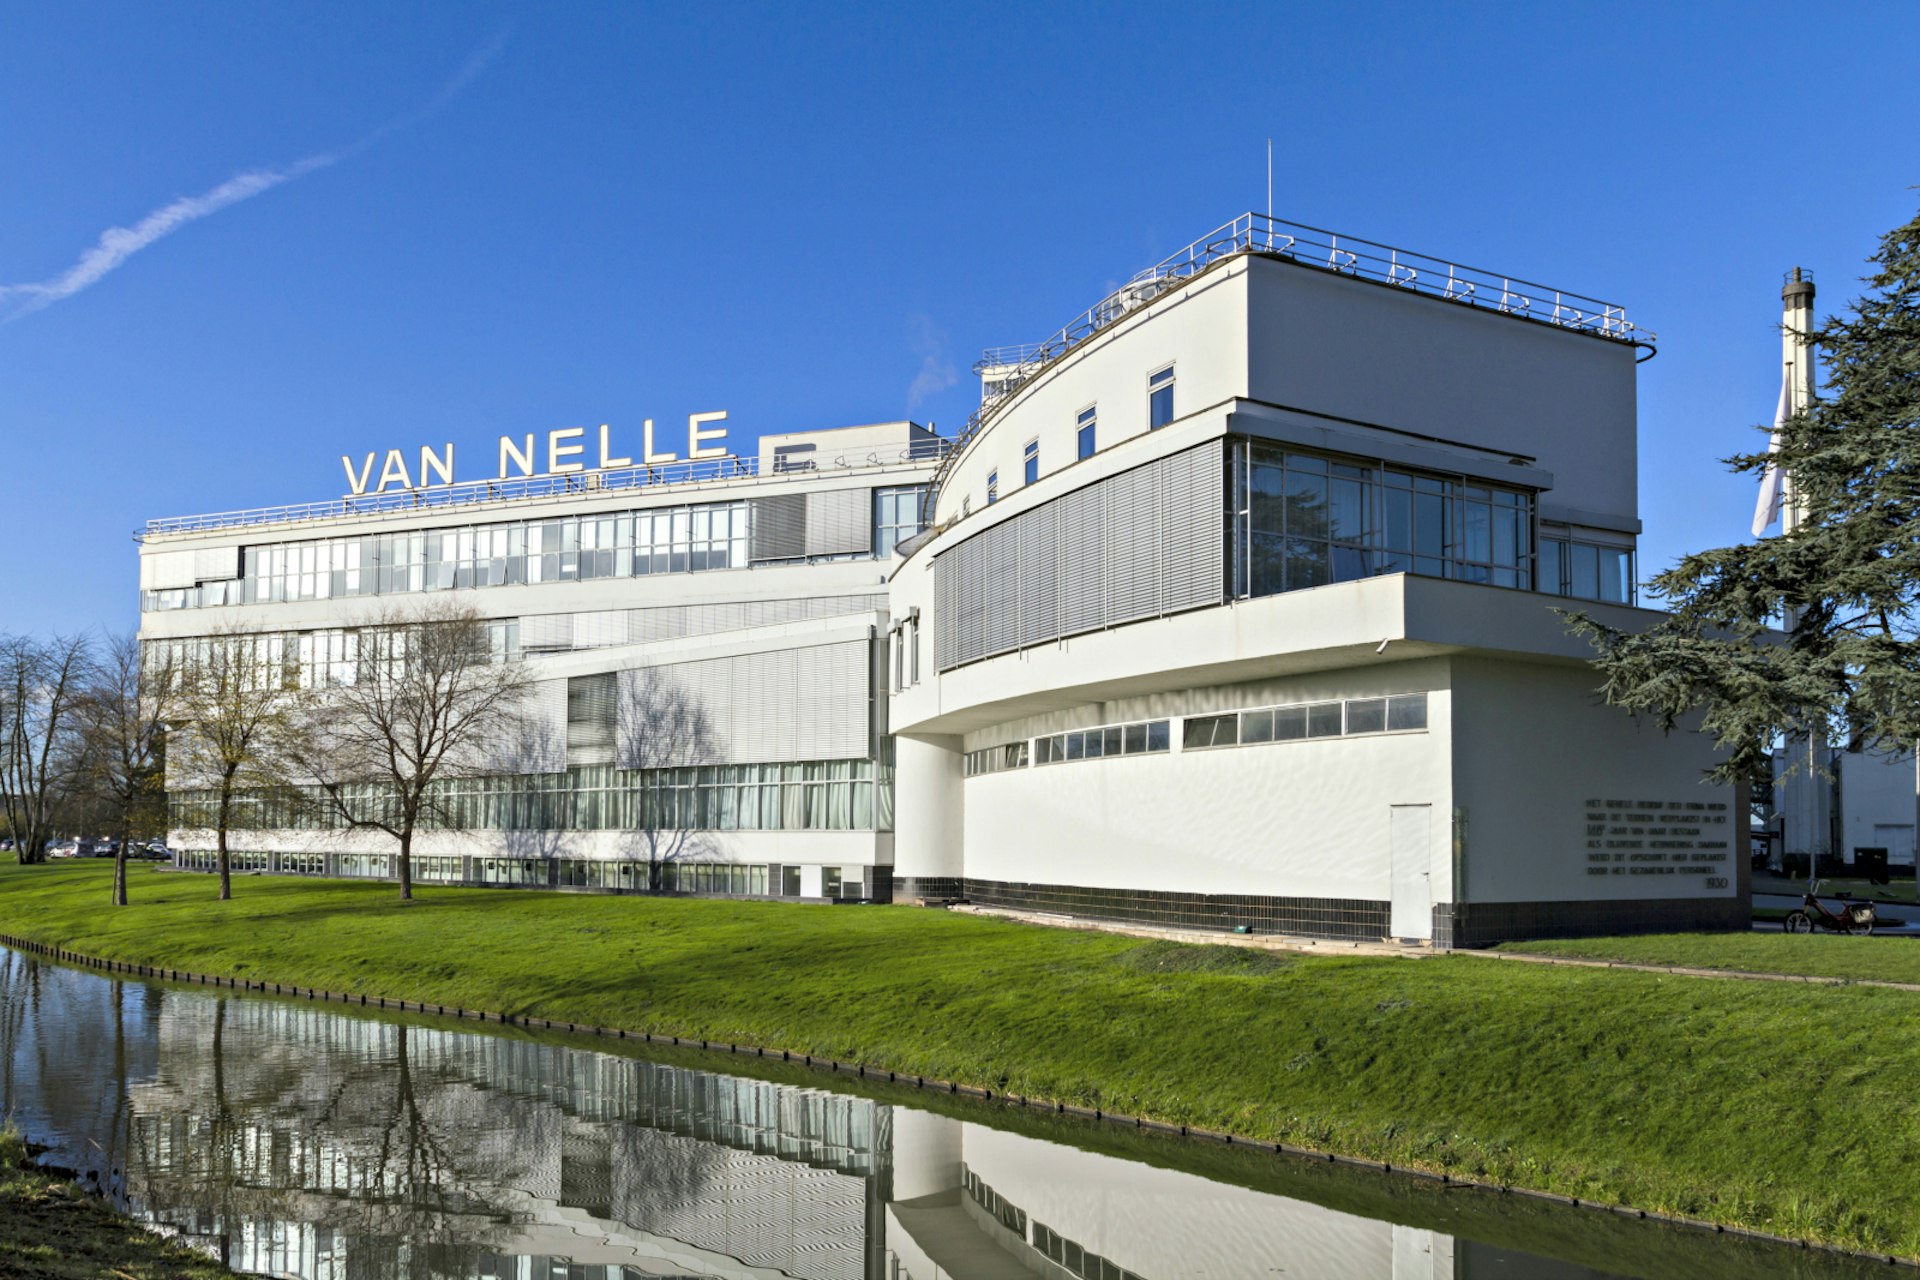 The former Van Nelle Factory in the sunshine